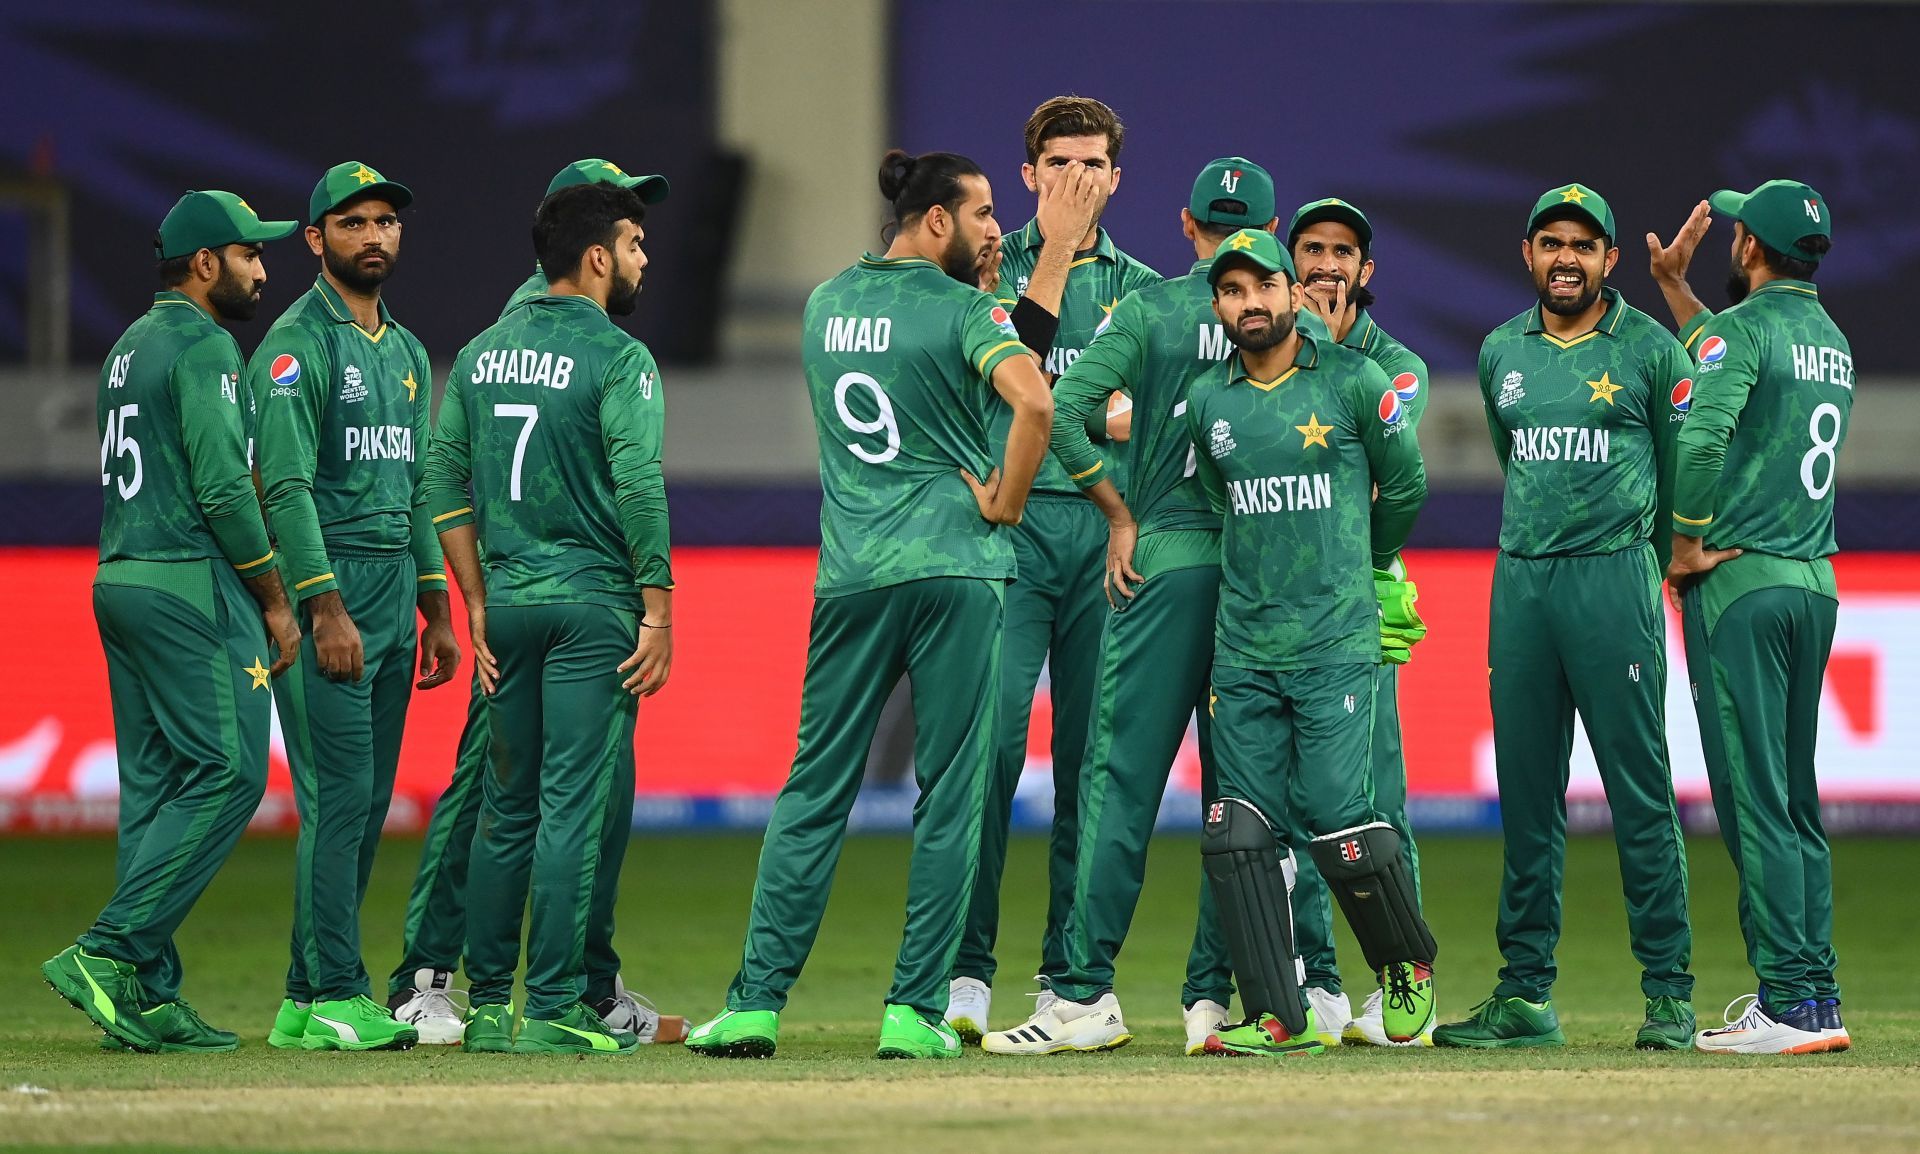 We never know which Pakistan side will show up on the day. Pic: Getty Images